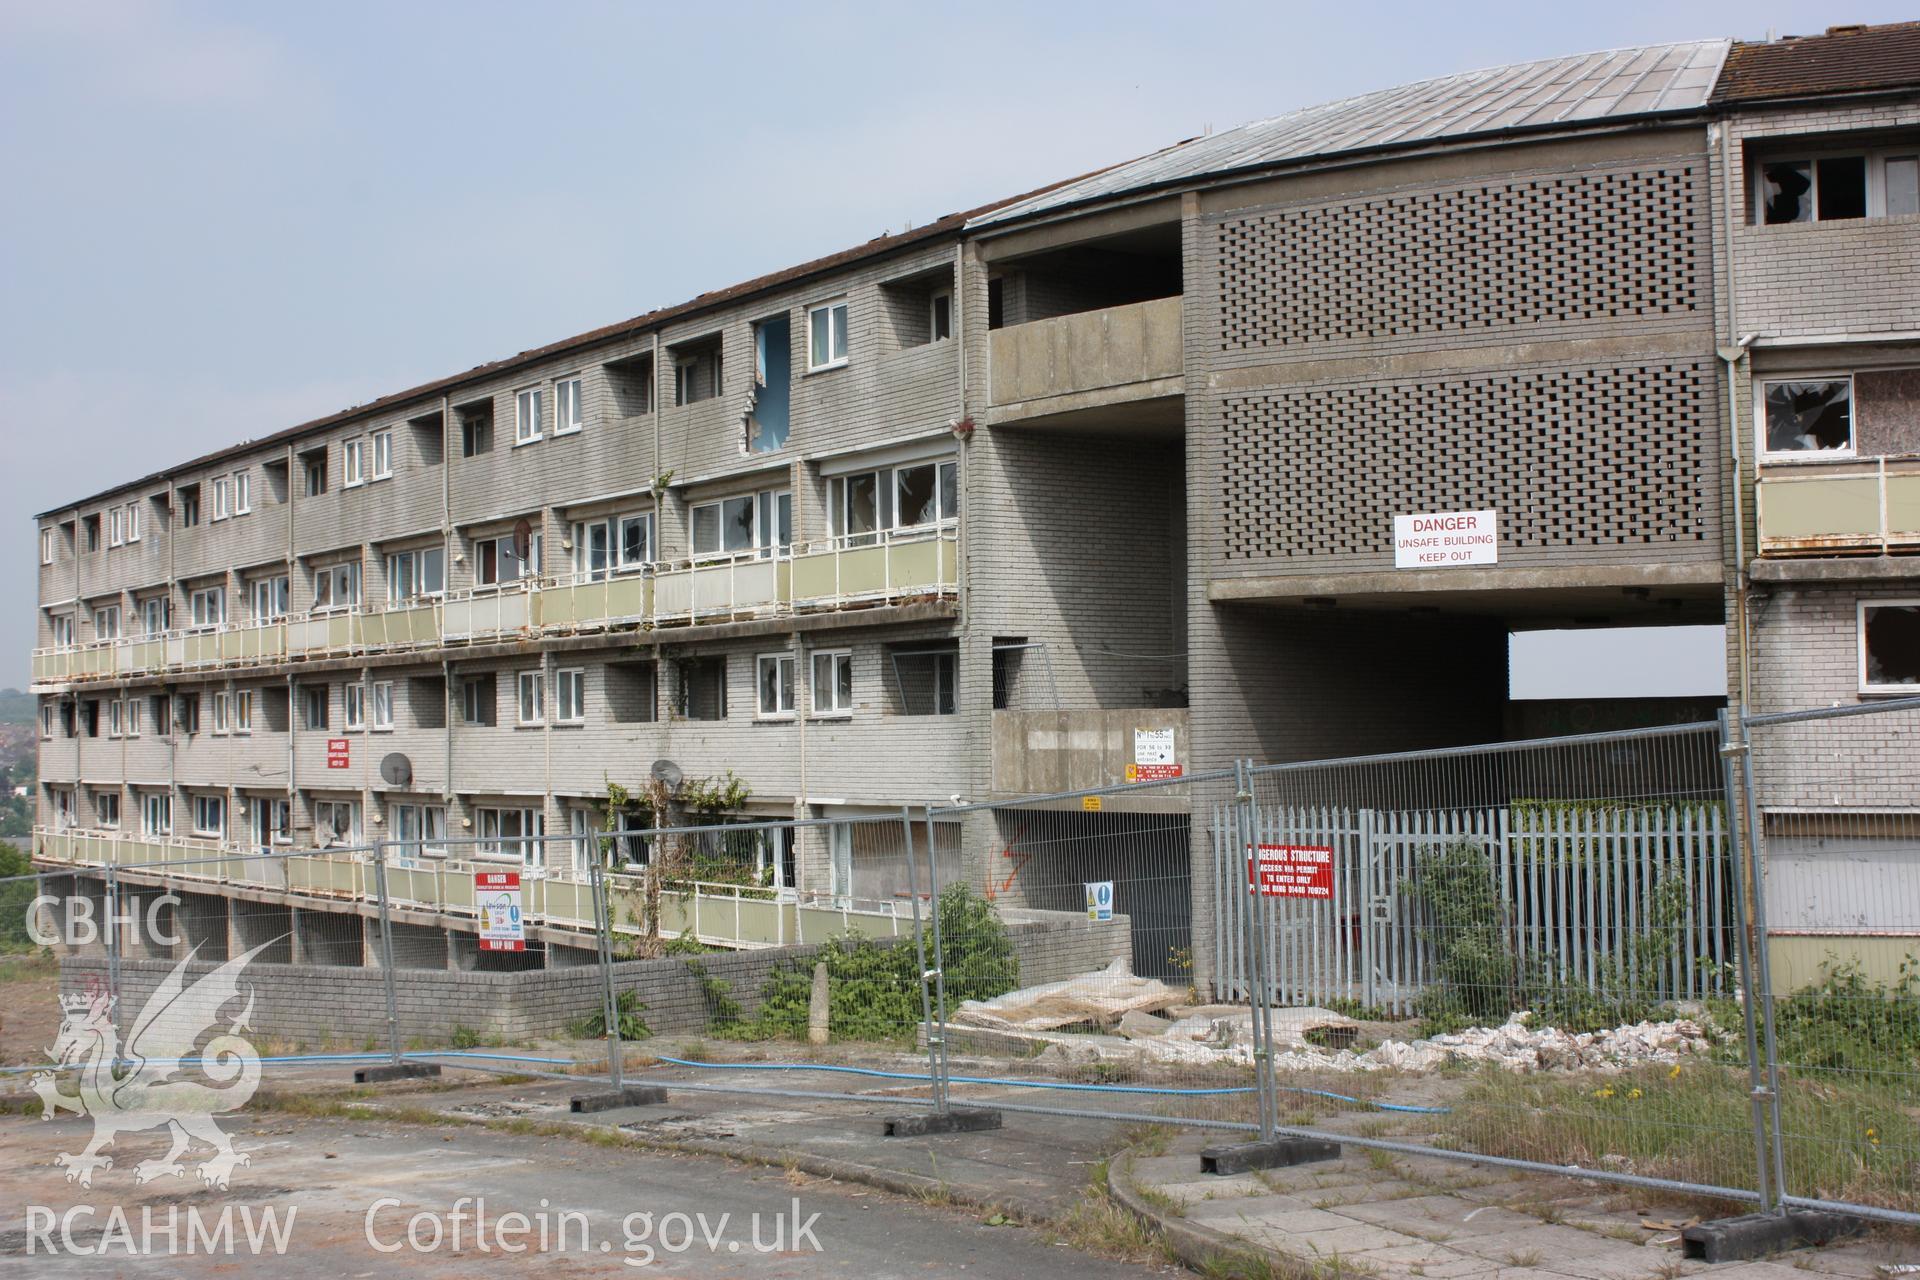 Photographic survey showing the exterior of the Billy Banks Estate by Geoff Ward 2010.